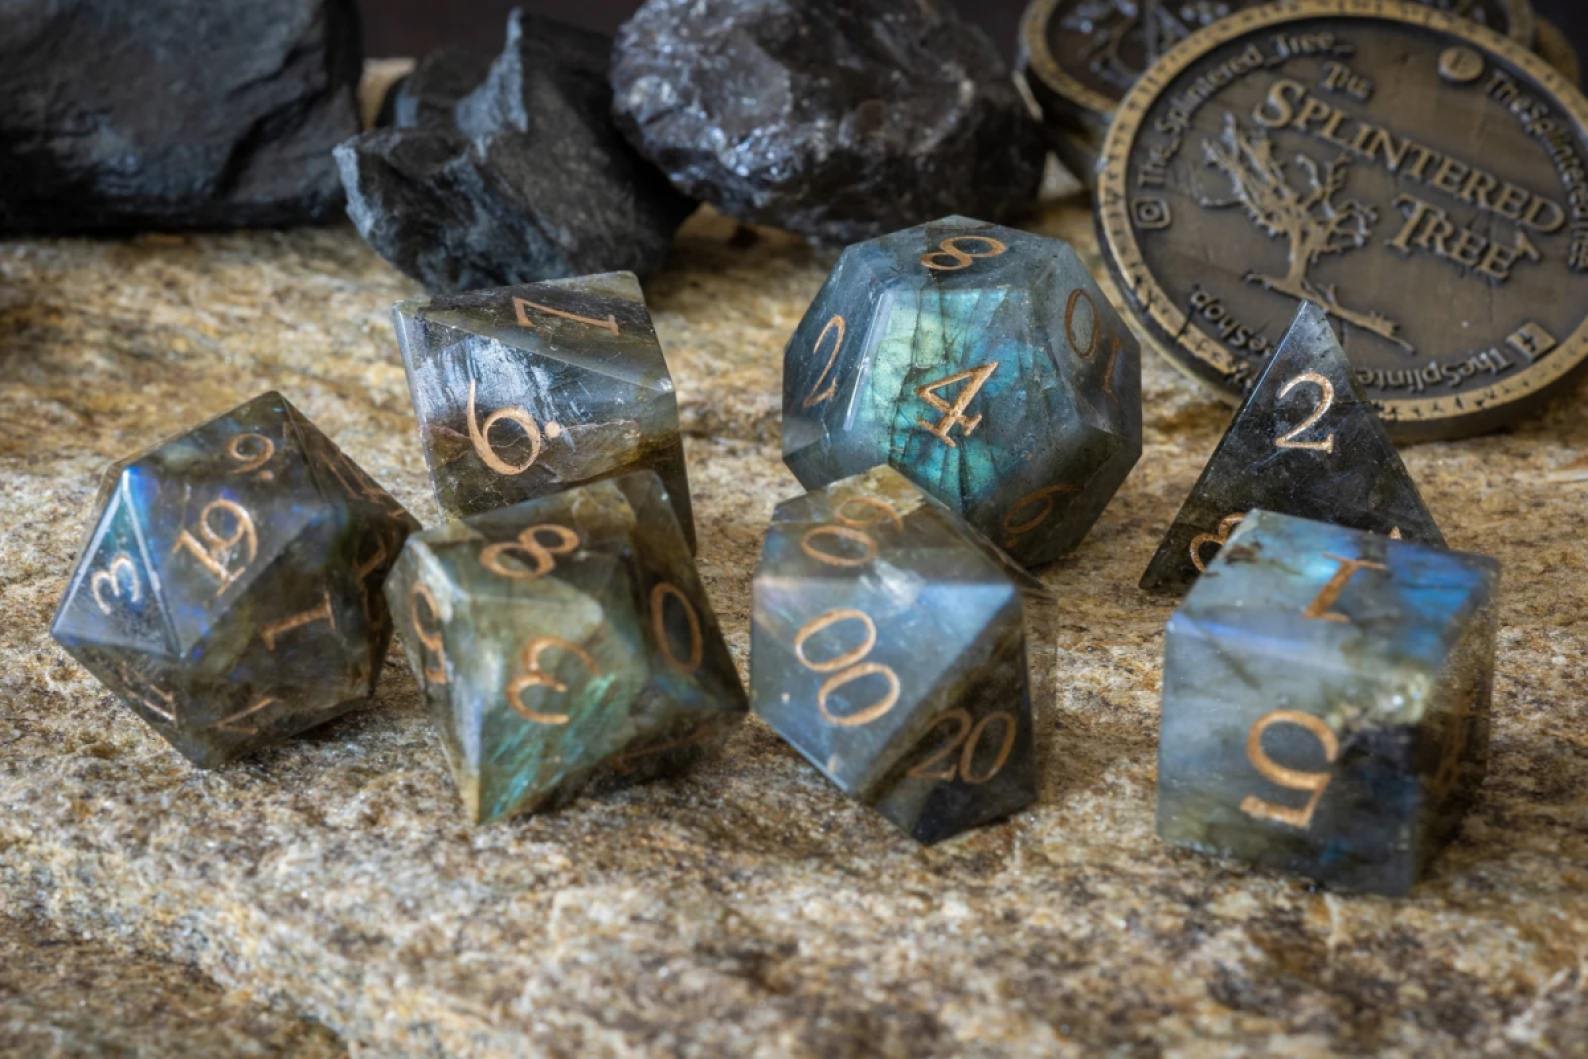 Dice carved from labradorite with gold numbers